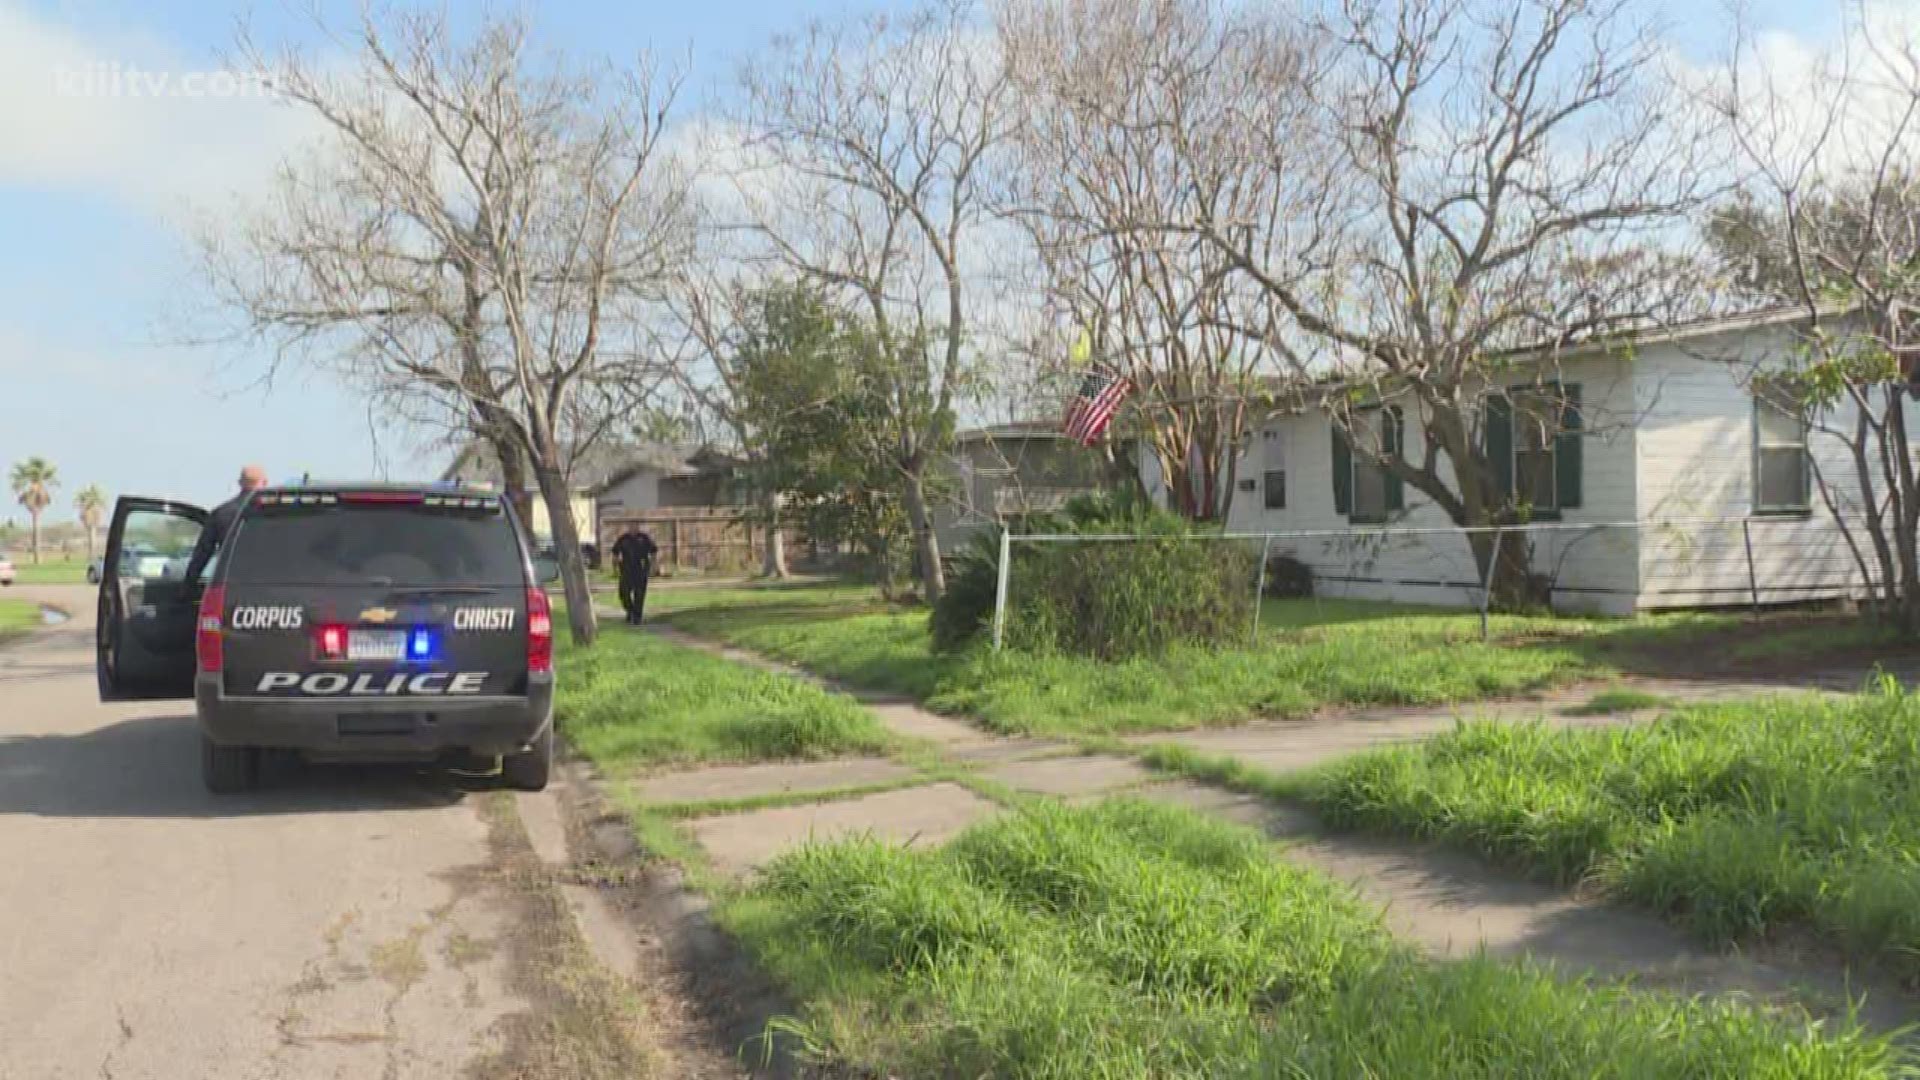 Corpus Christi police are looking for a man who they say shot at his girlfriend at around 10 a.m. Monday.